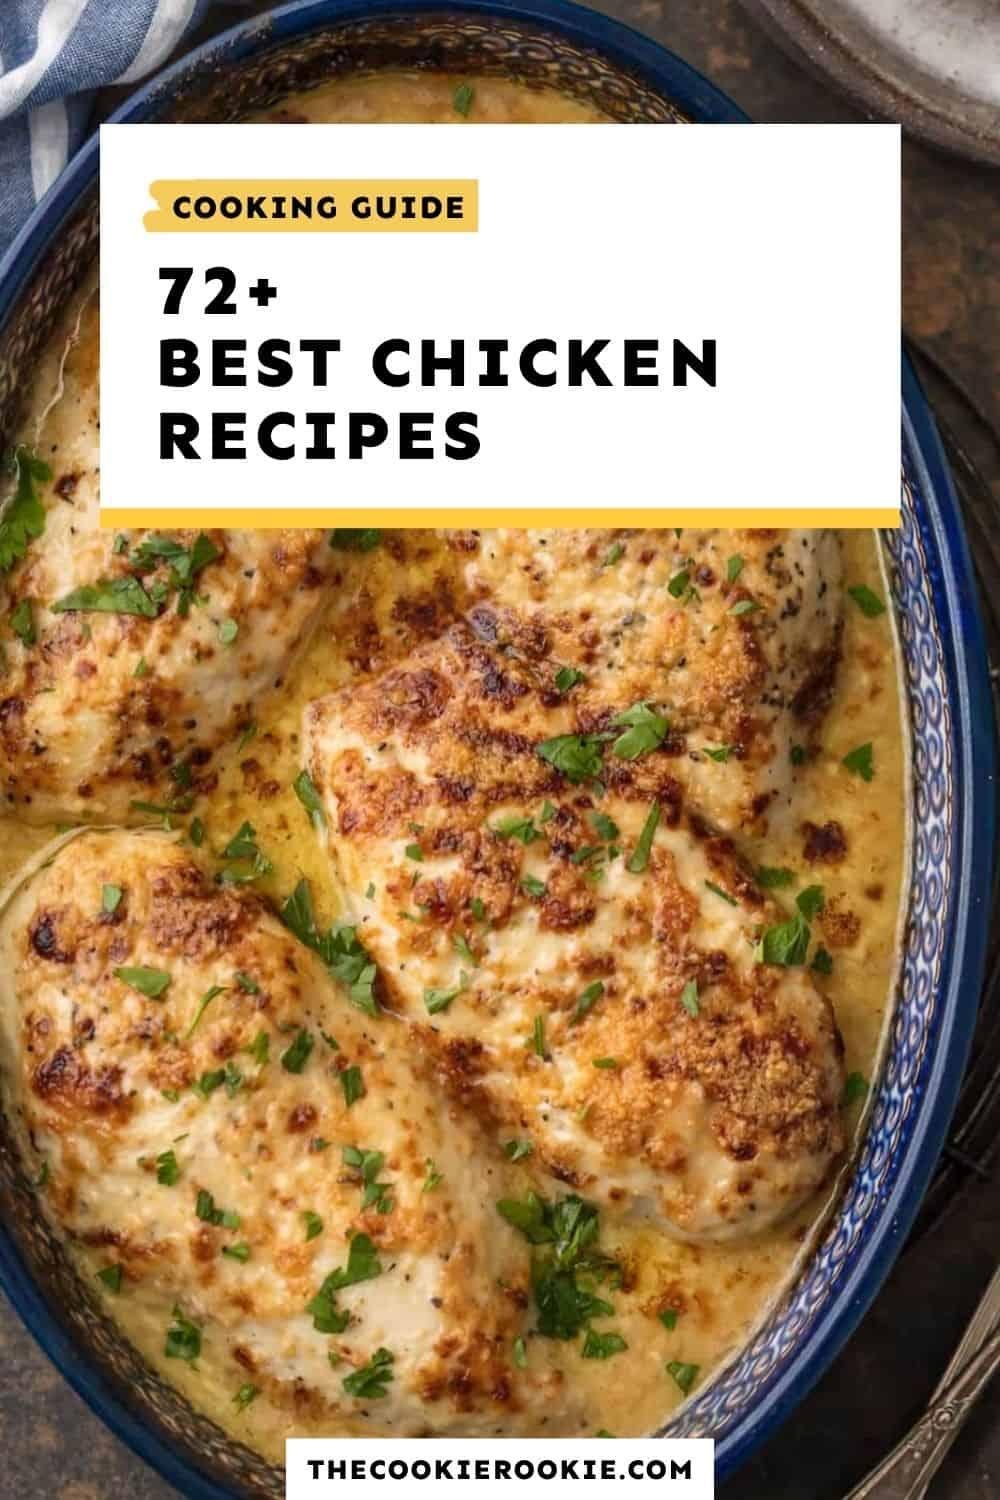 10 Mouth-Watering and Easy Chicken Recipes for a Quick Dinner Fix